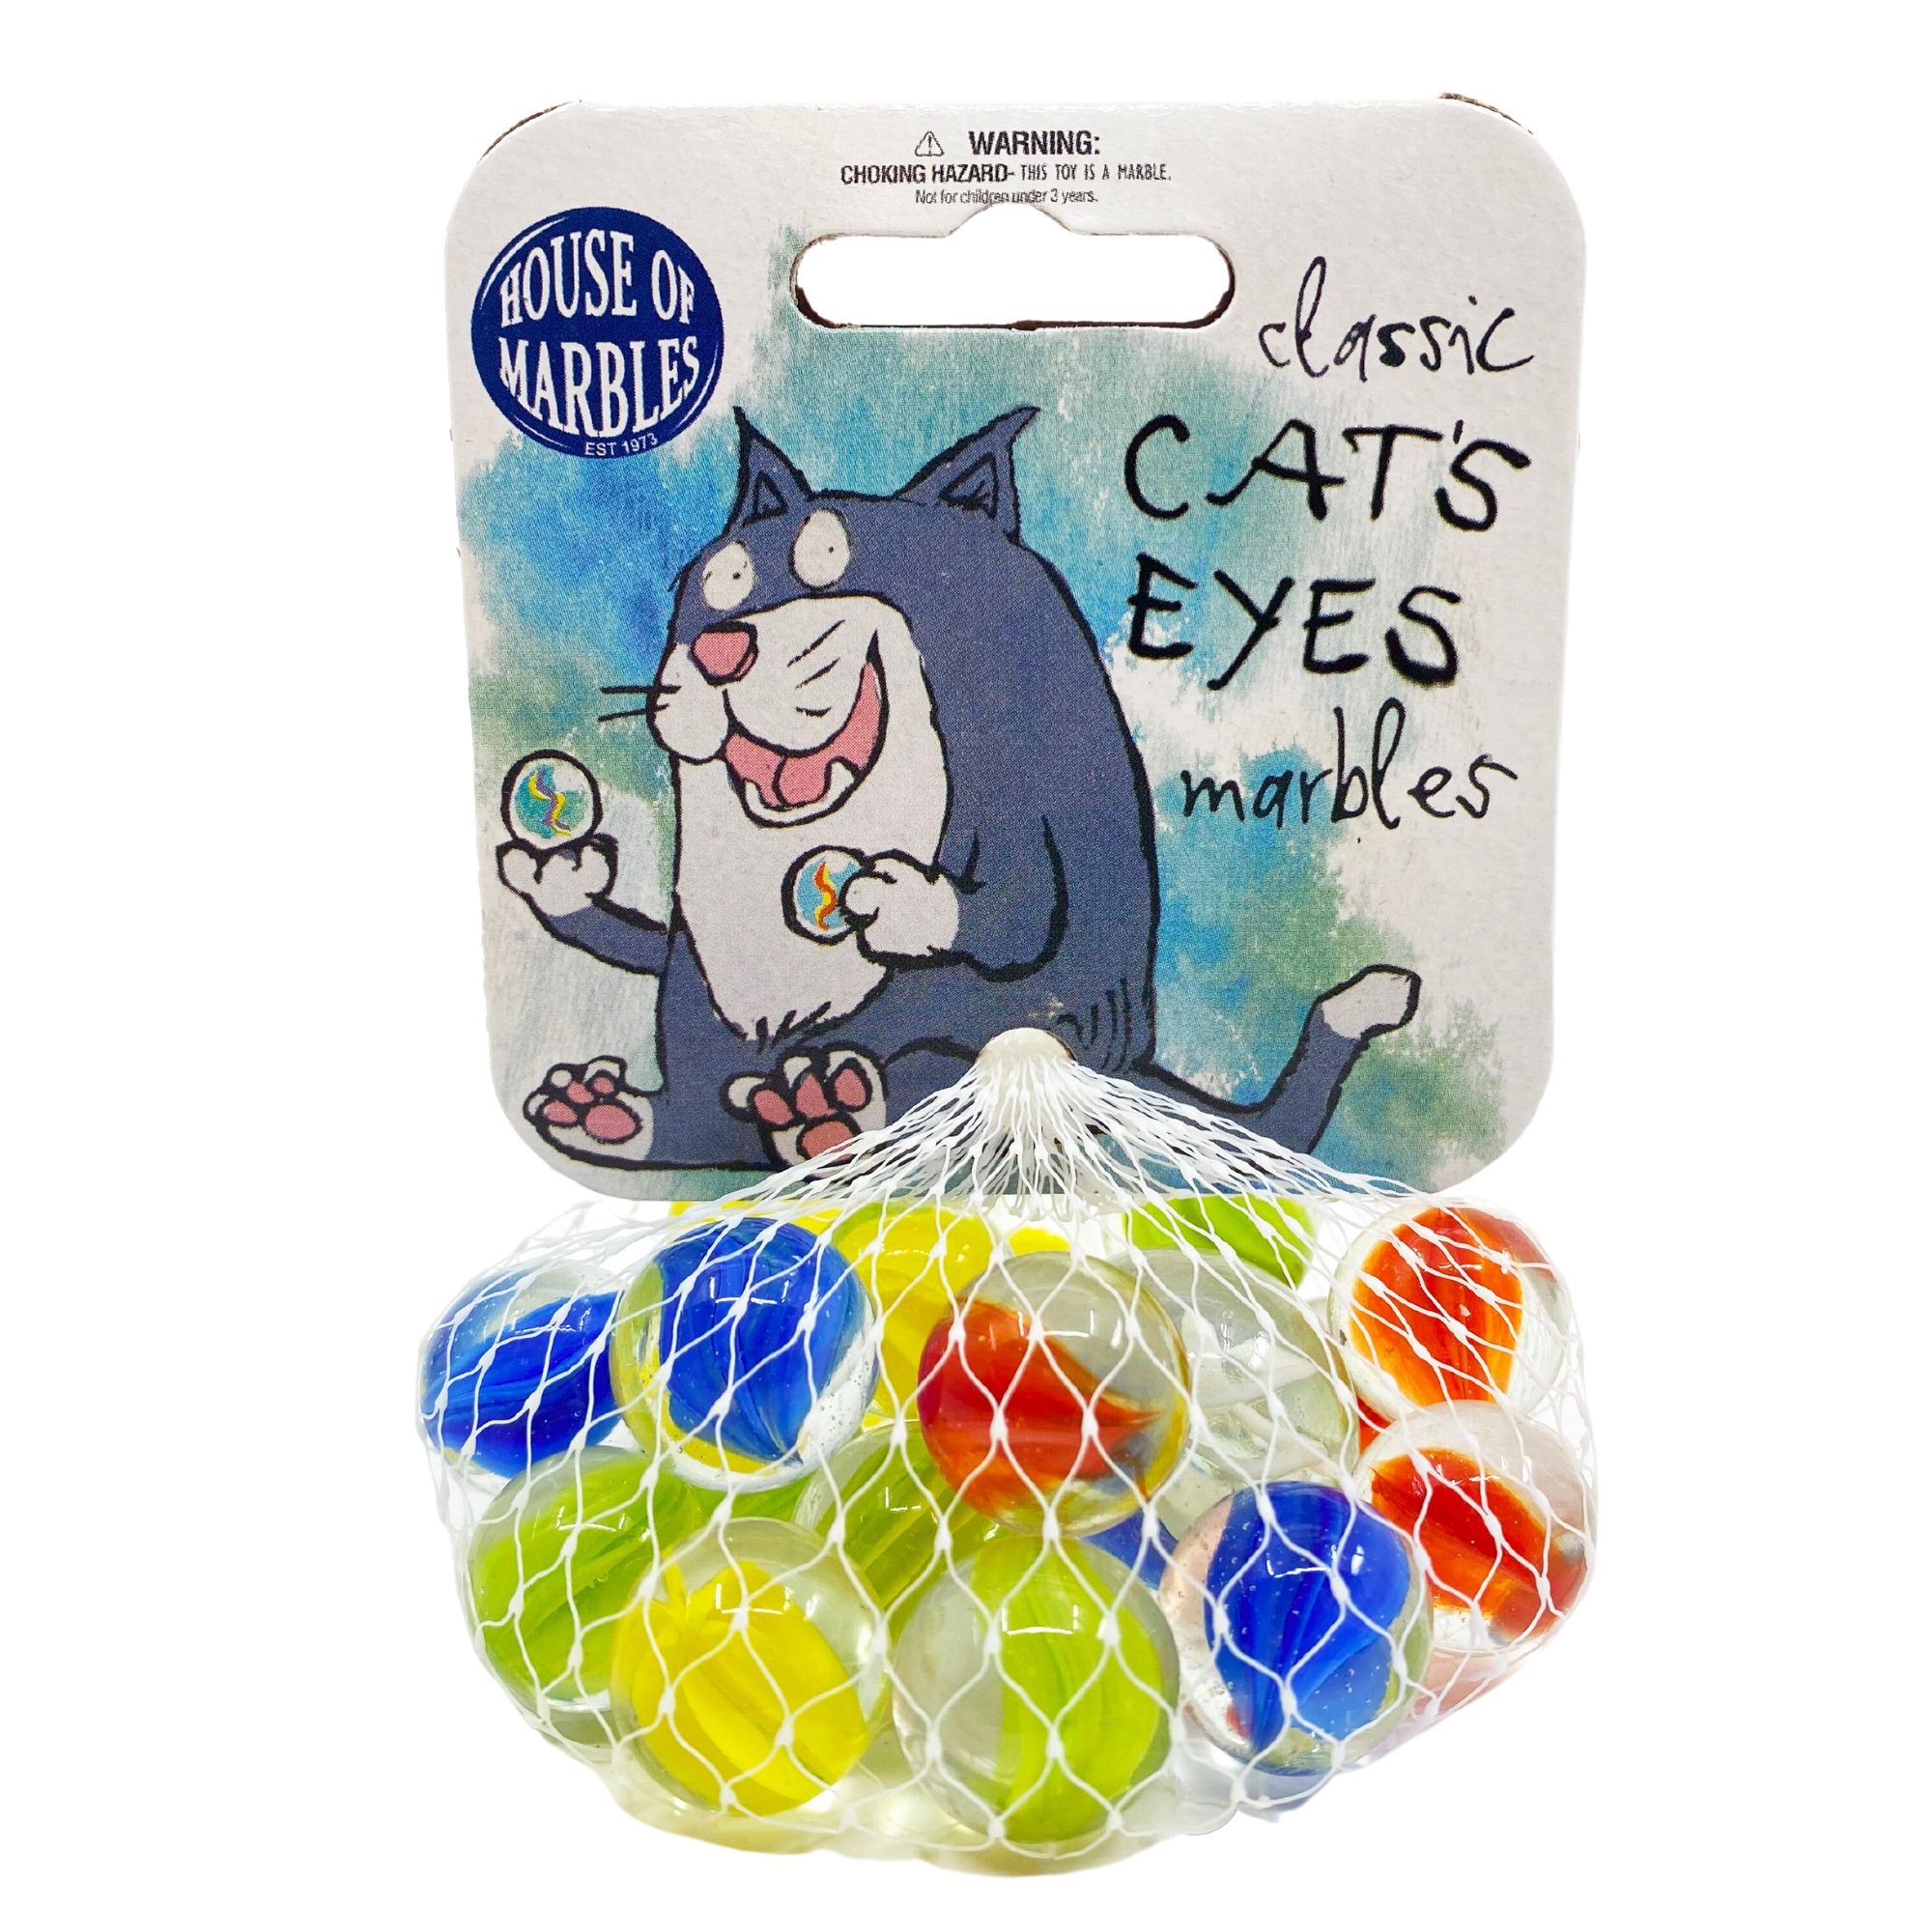 House of Marbles Net Bag of Marbles: Cats Eyes